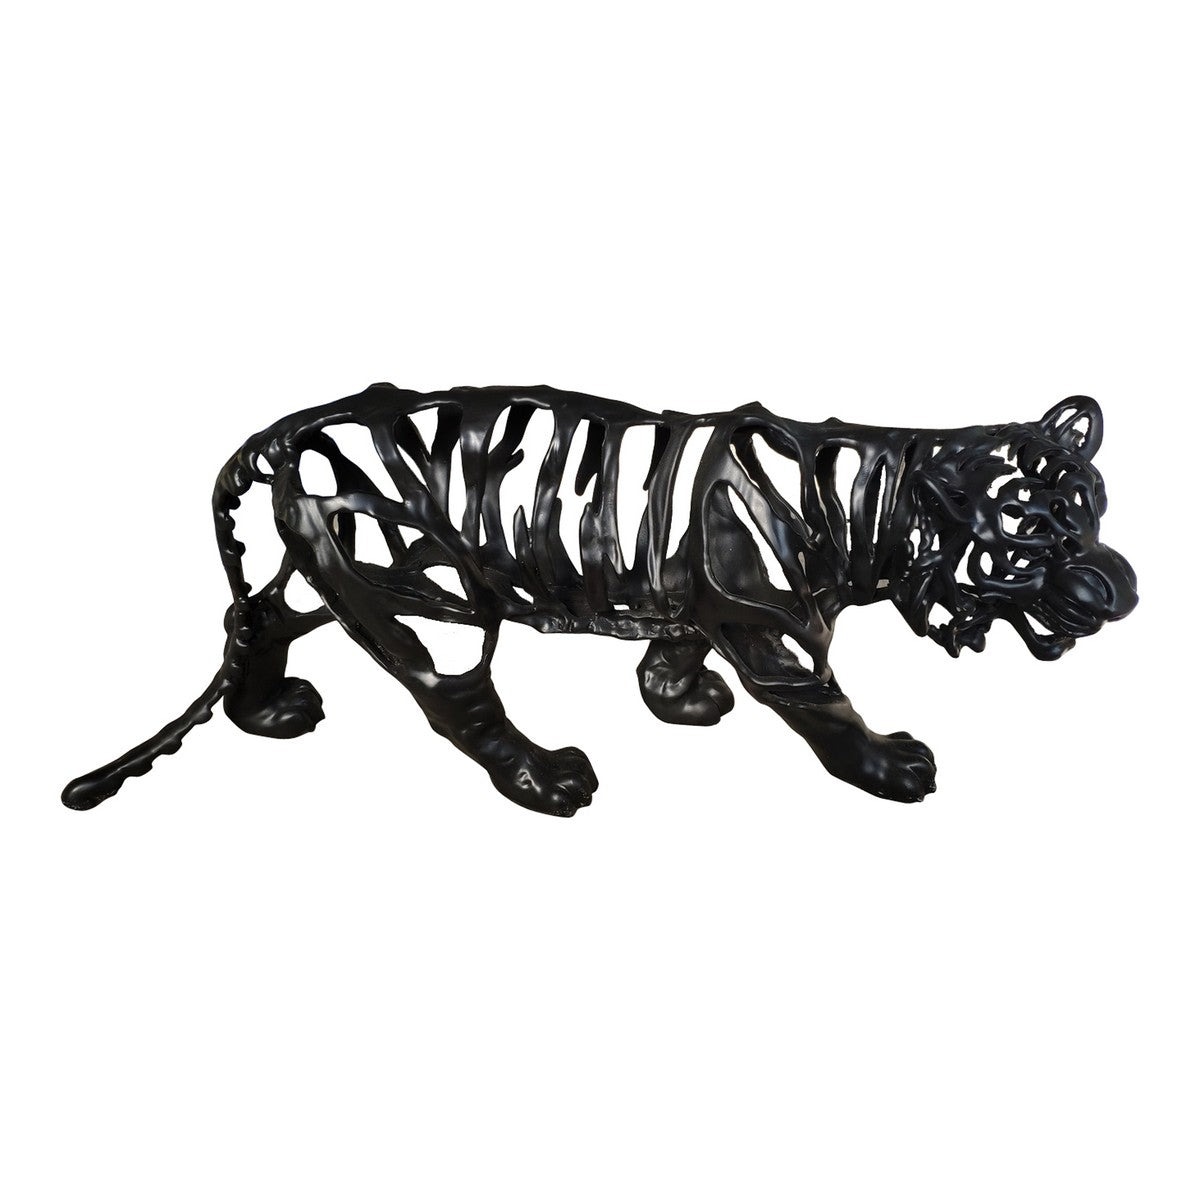 Moe's Home Collection Tiger Stripes Statue Large Black - LA-1079-02 - Moe's Home Collection - Art - Minimal And Modern - 1